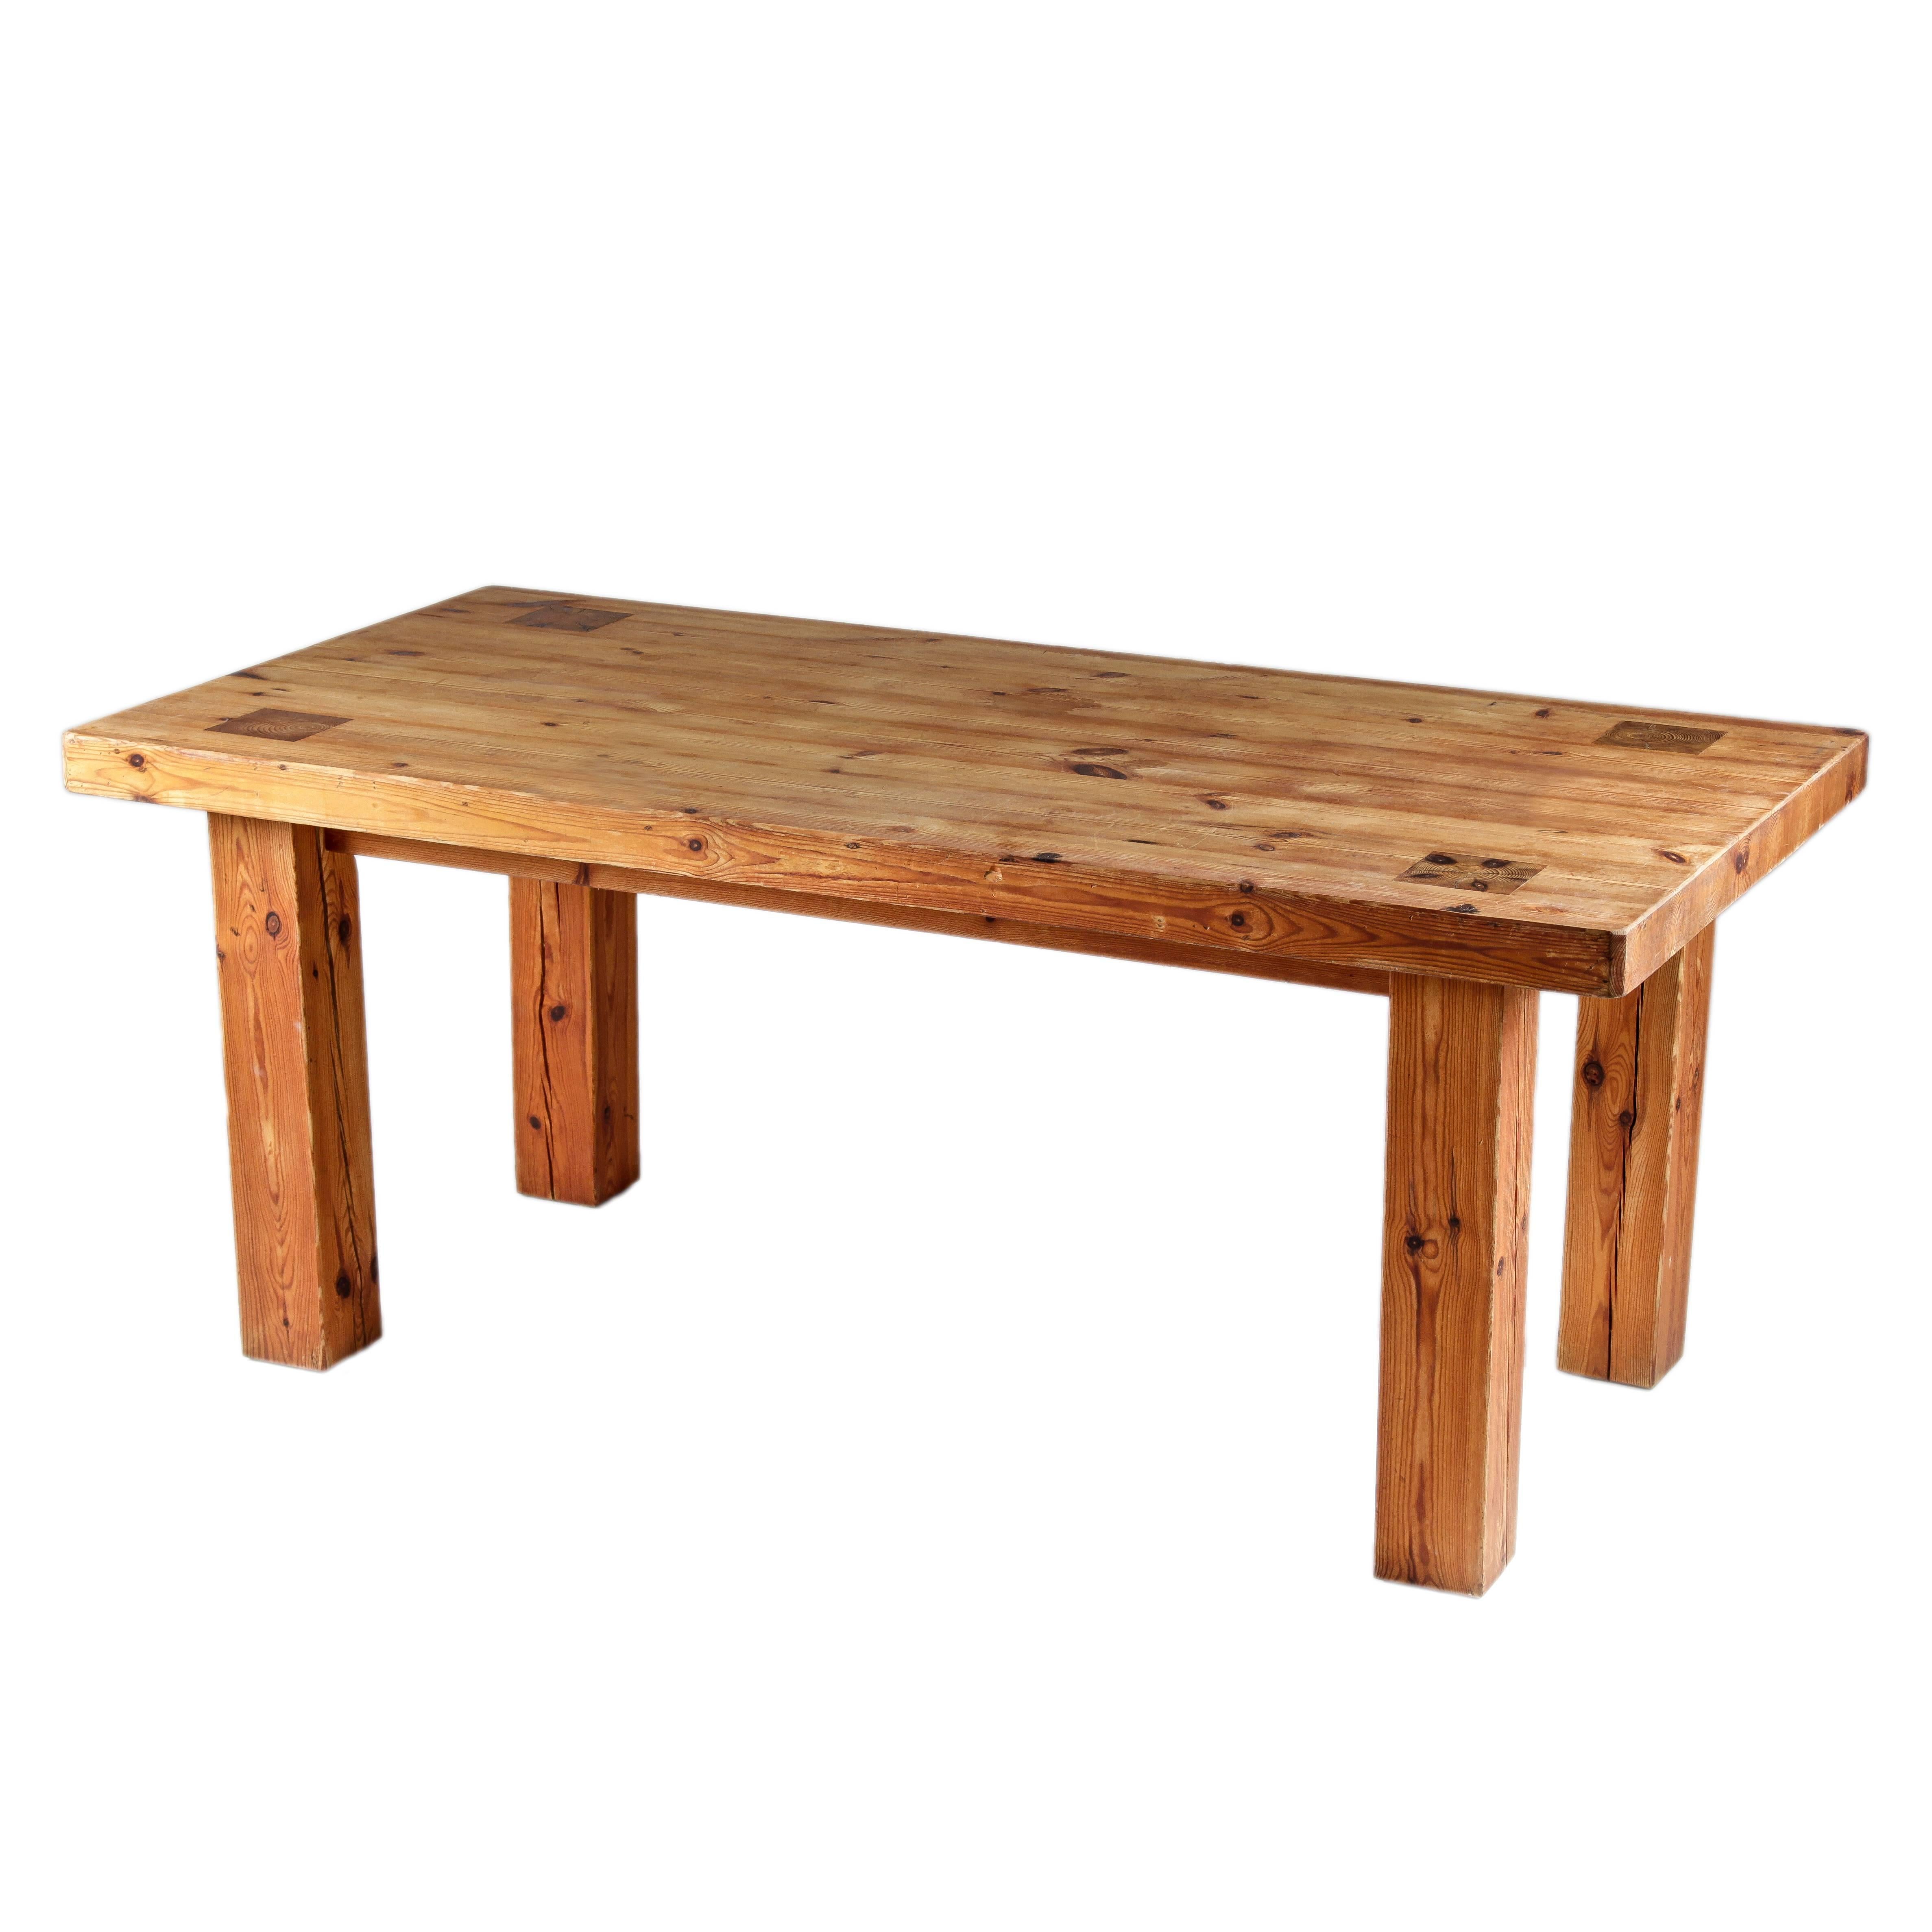 Swedish Table Made of Wood from an Old Barn